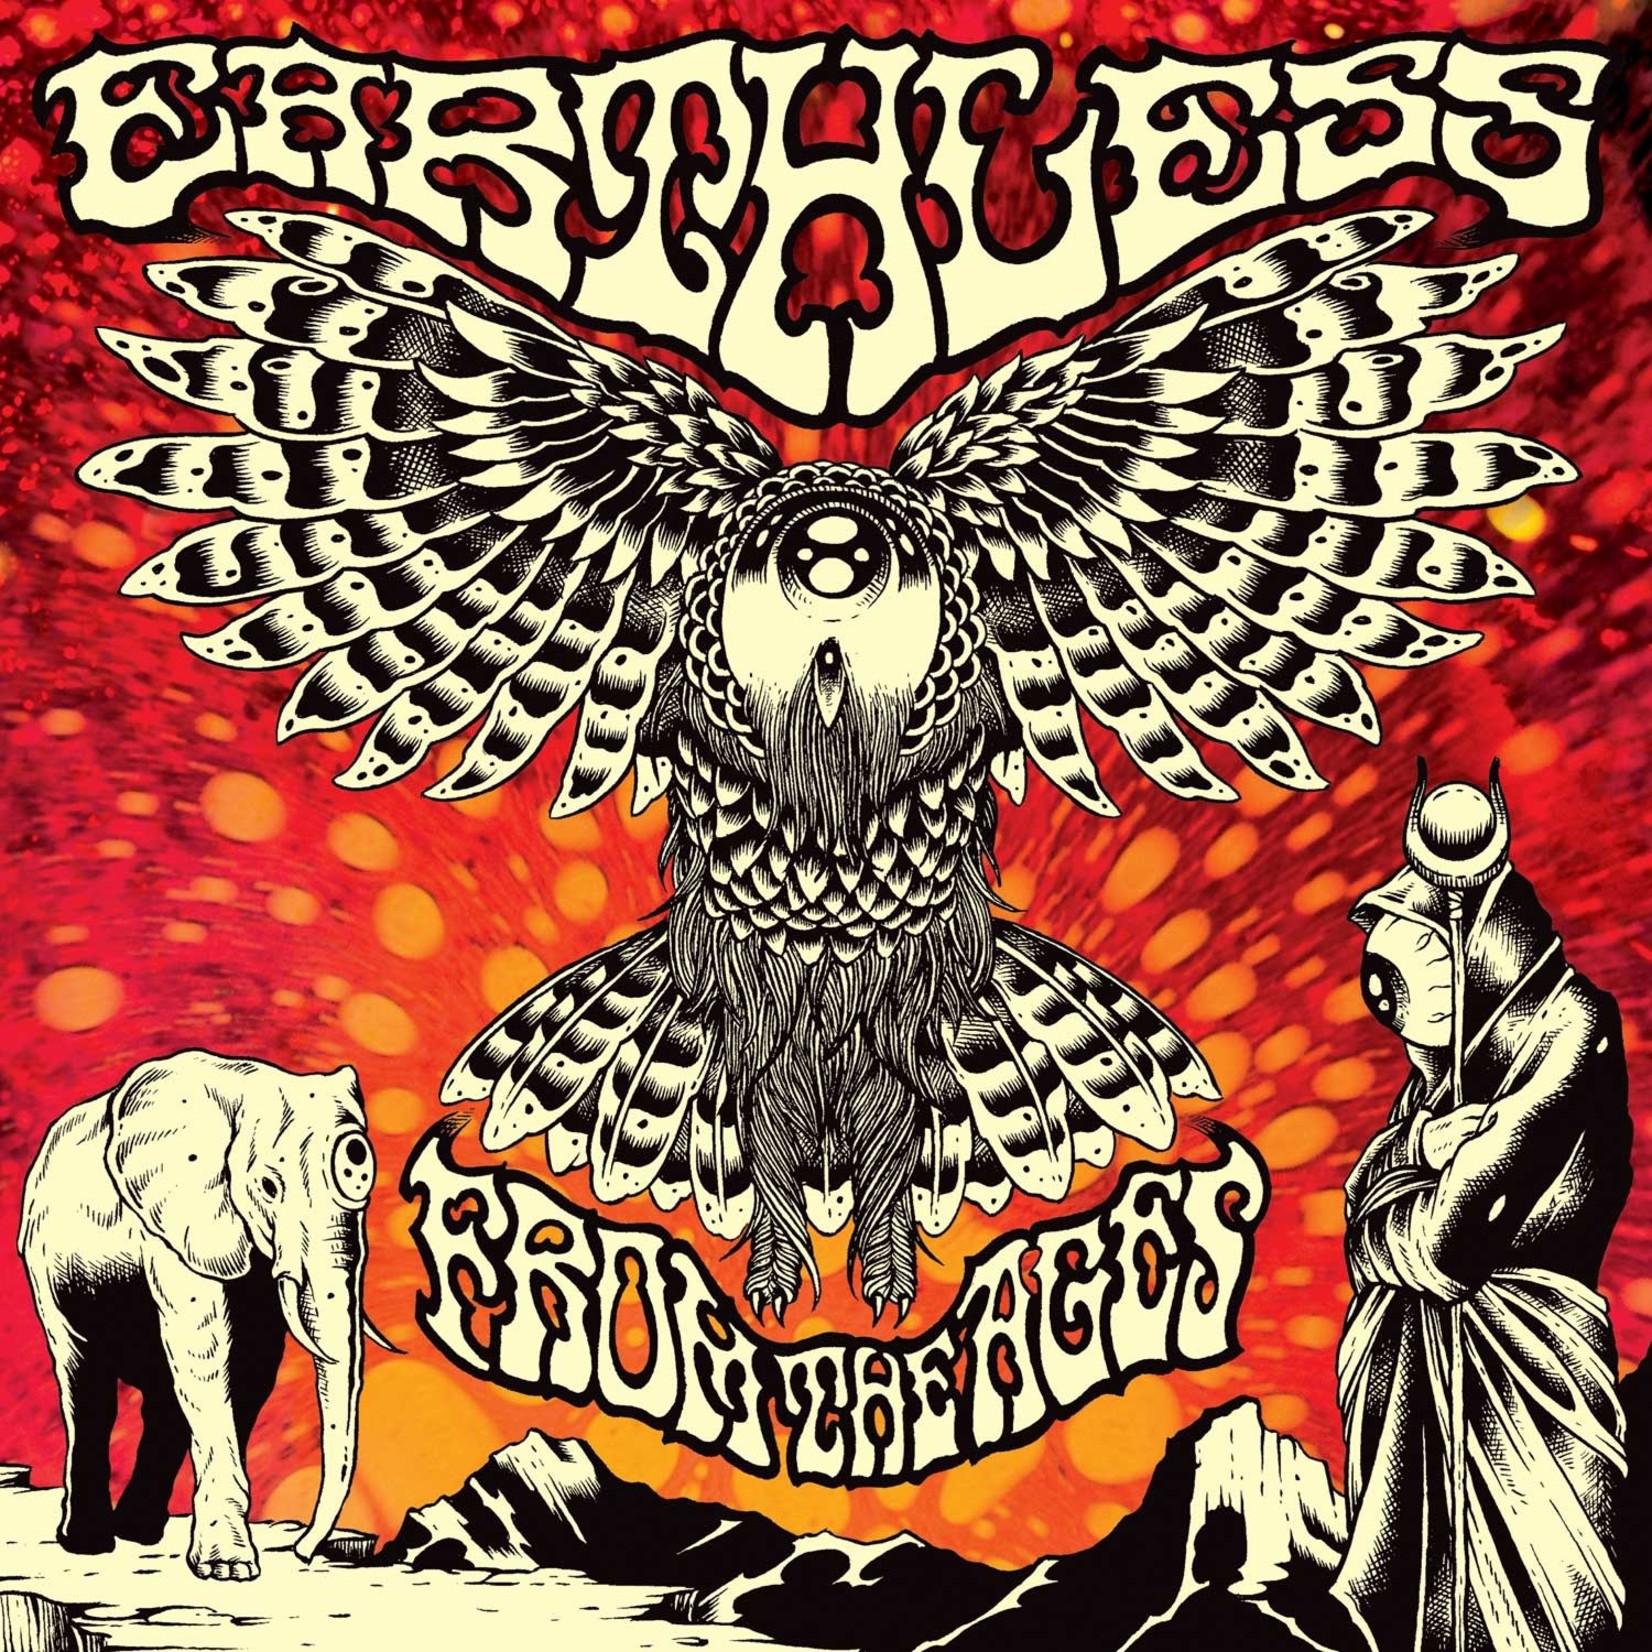 [New] Earthless: From The Ages (2LP, indie exclusive, clear vinyl with red splatter) [NUCLEAR BLAST]